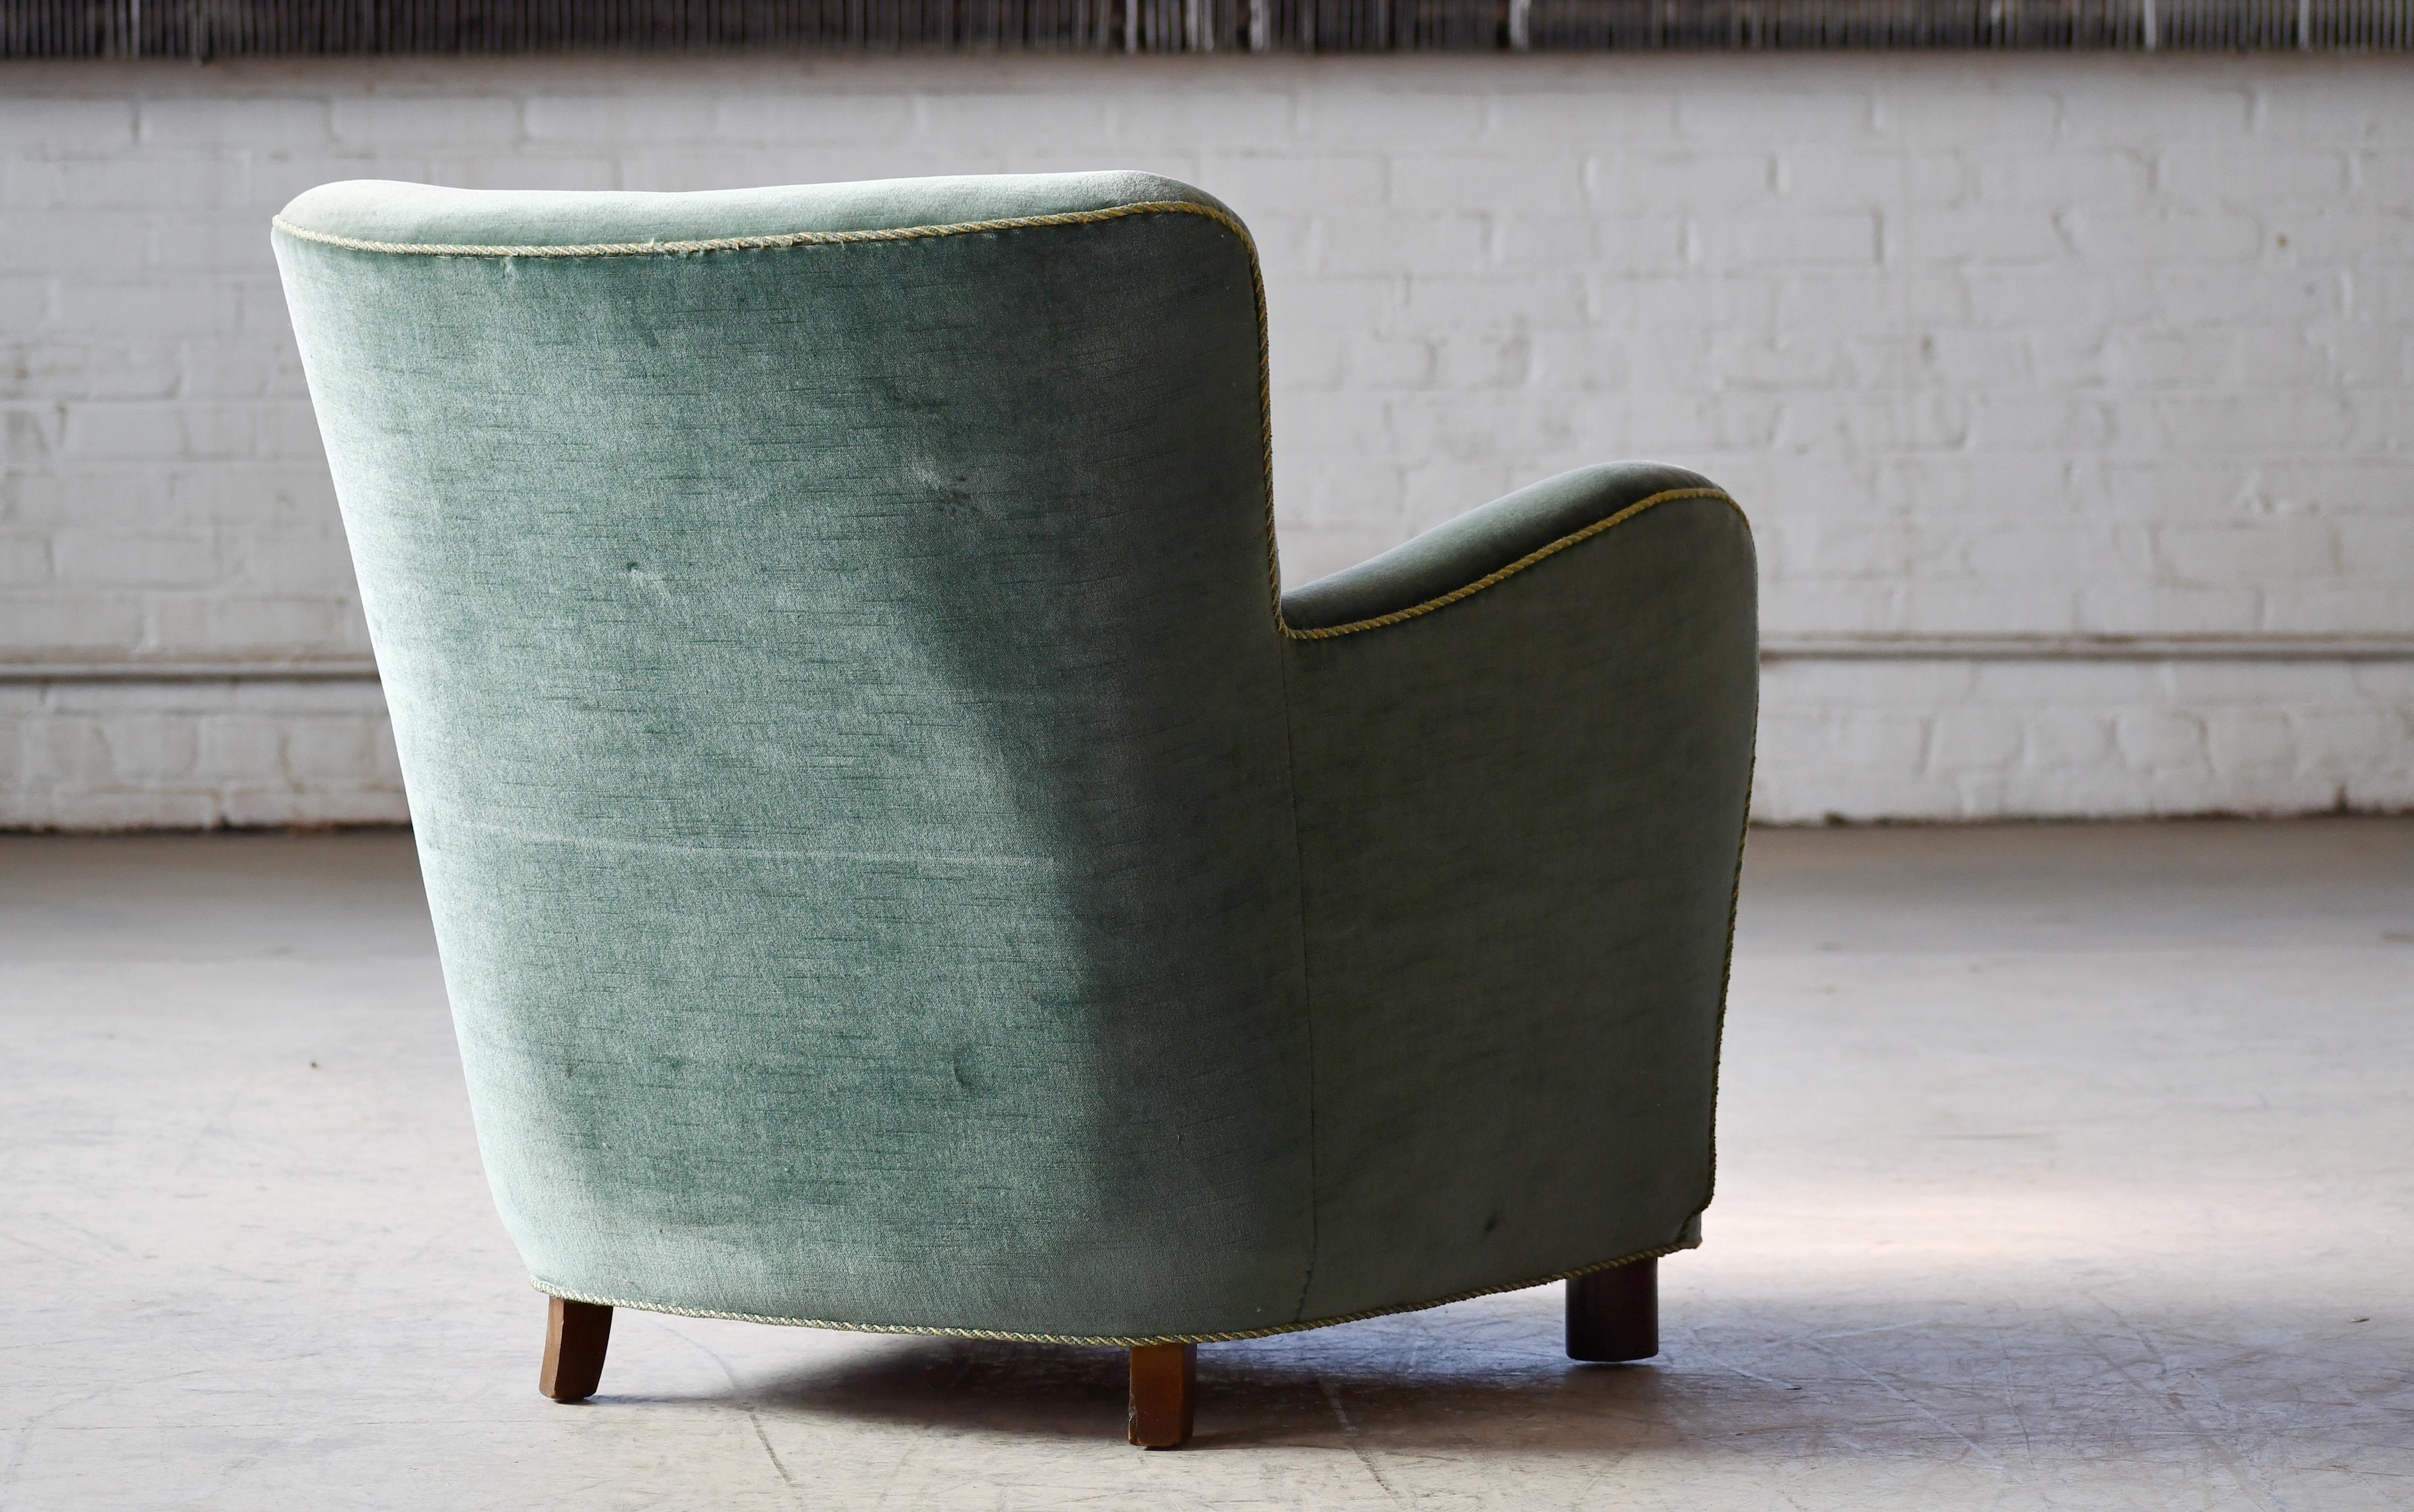 Danish Art Deco or Early Midcentury Lounge Chair in Green Mohair 1930-40s For Sale 3